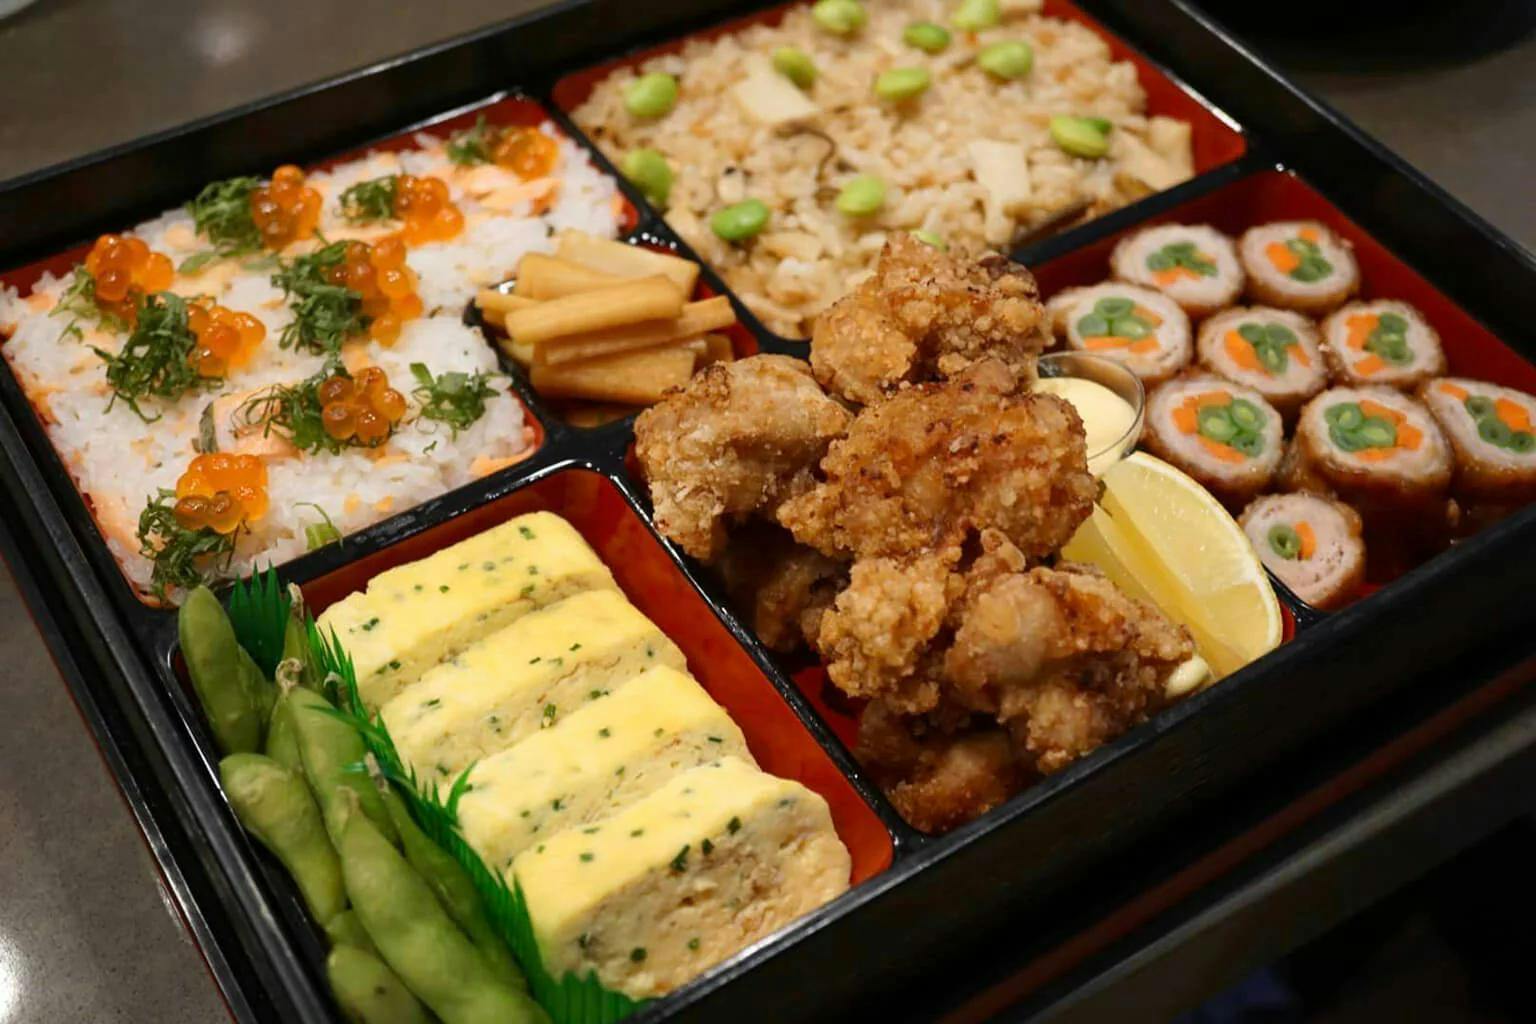 Bentos are great for picnics because they contain small portions of various dishes.